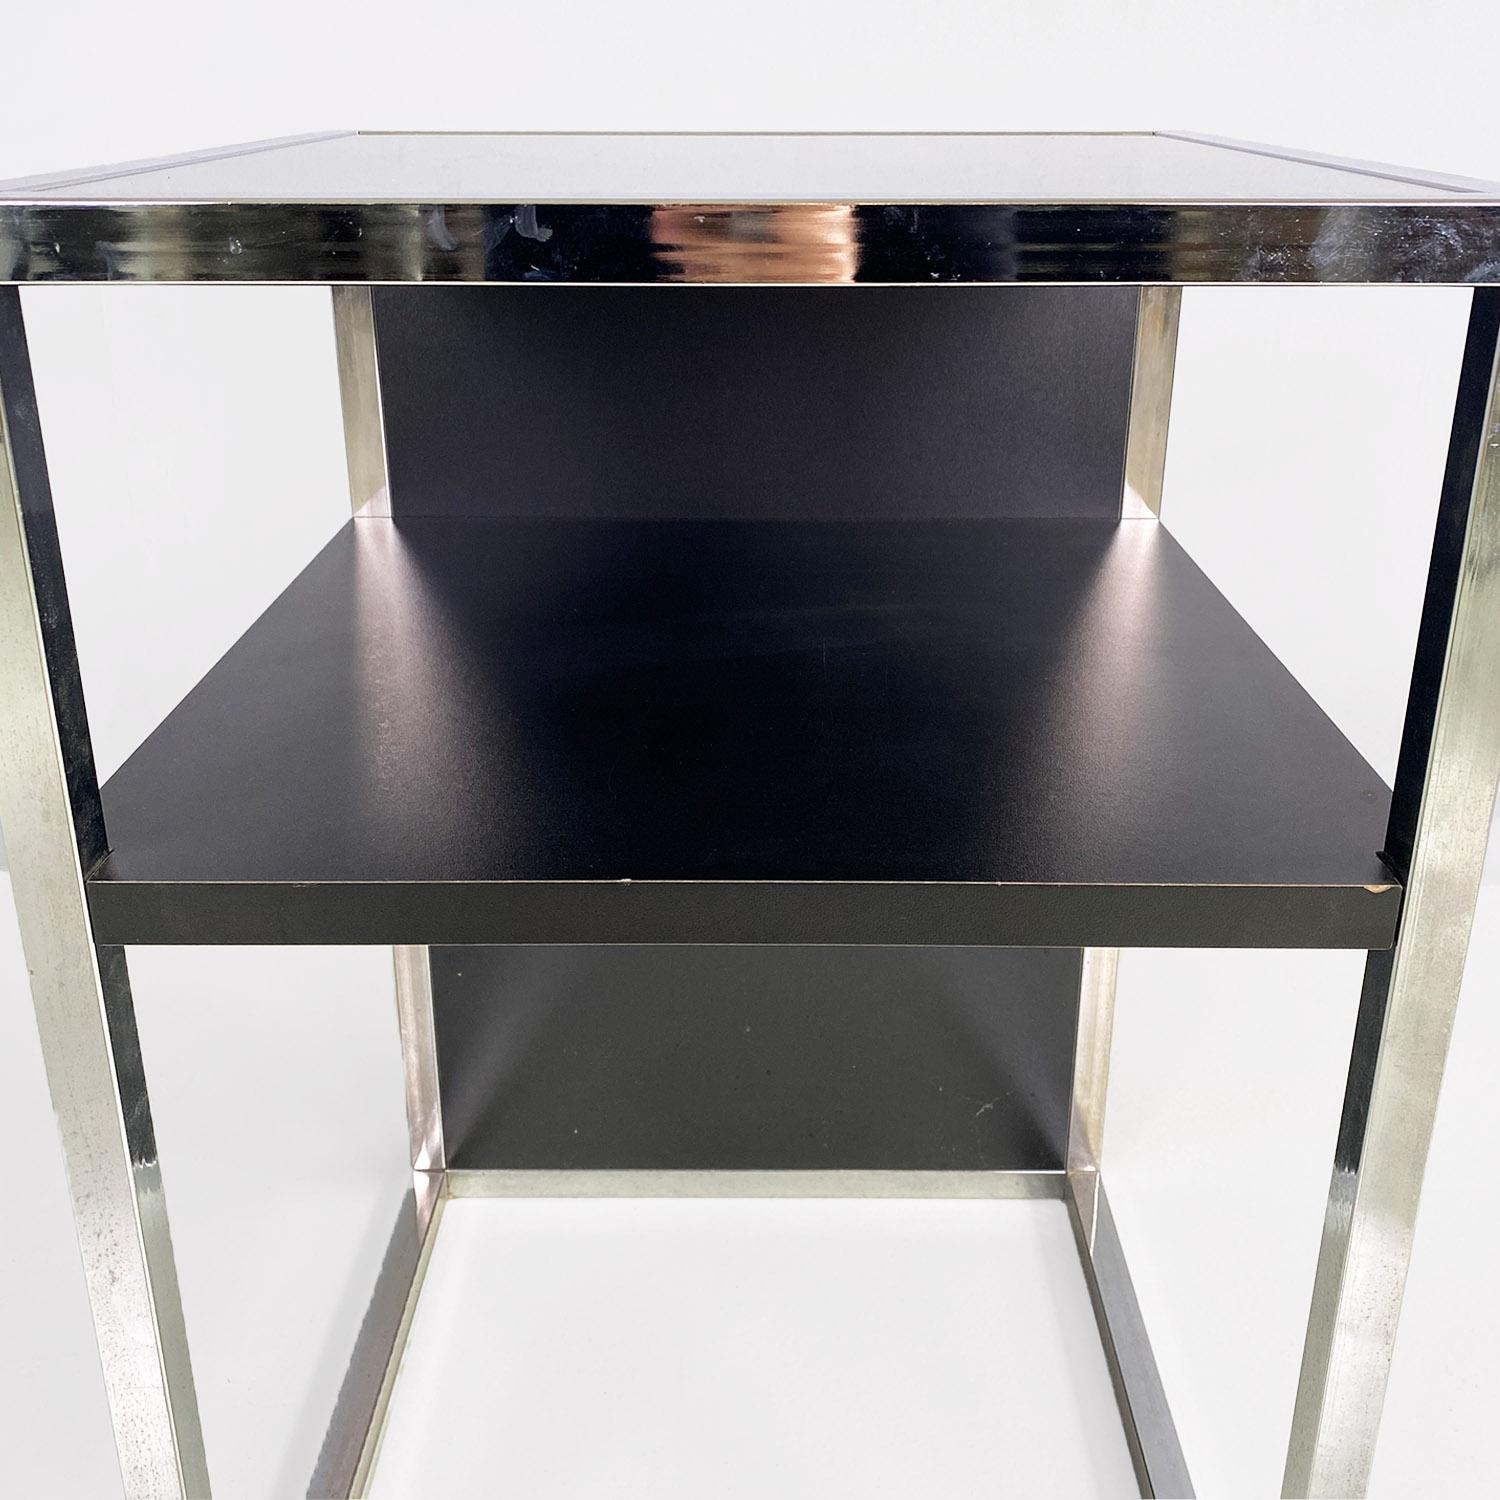 Italian modern chromed steel, wood and glass table for stereo and vinyls, 1990s For Sale 7